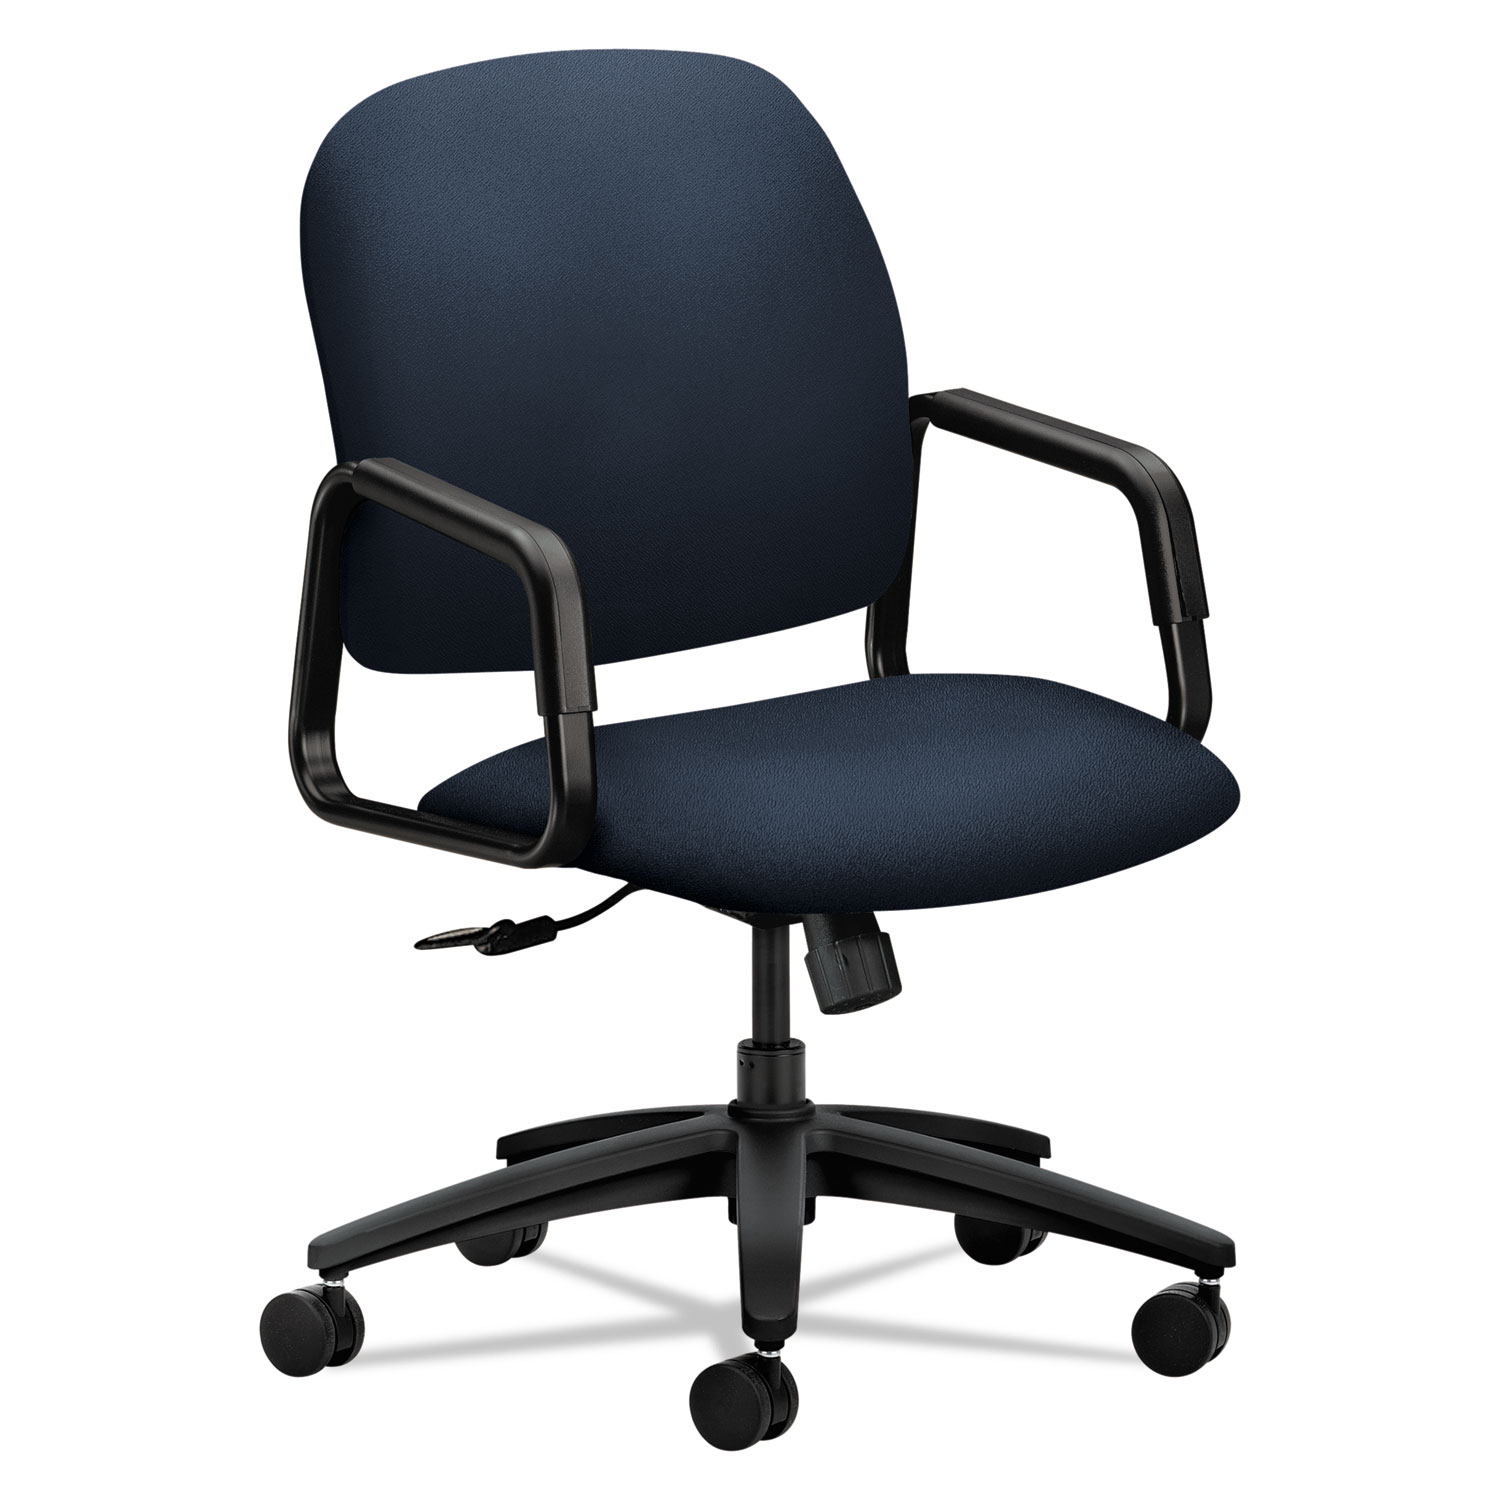 Solutions Seating 4000 Series Executive High-Back Chair, Navy